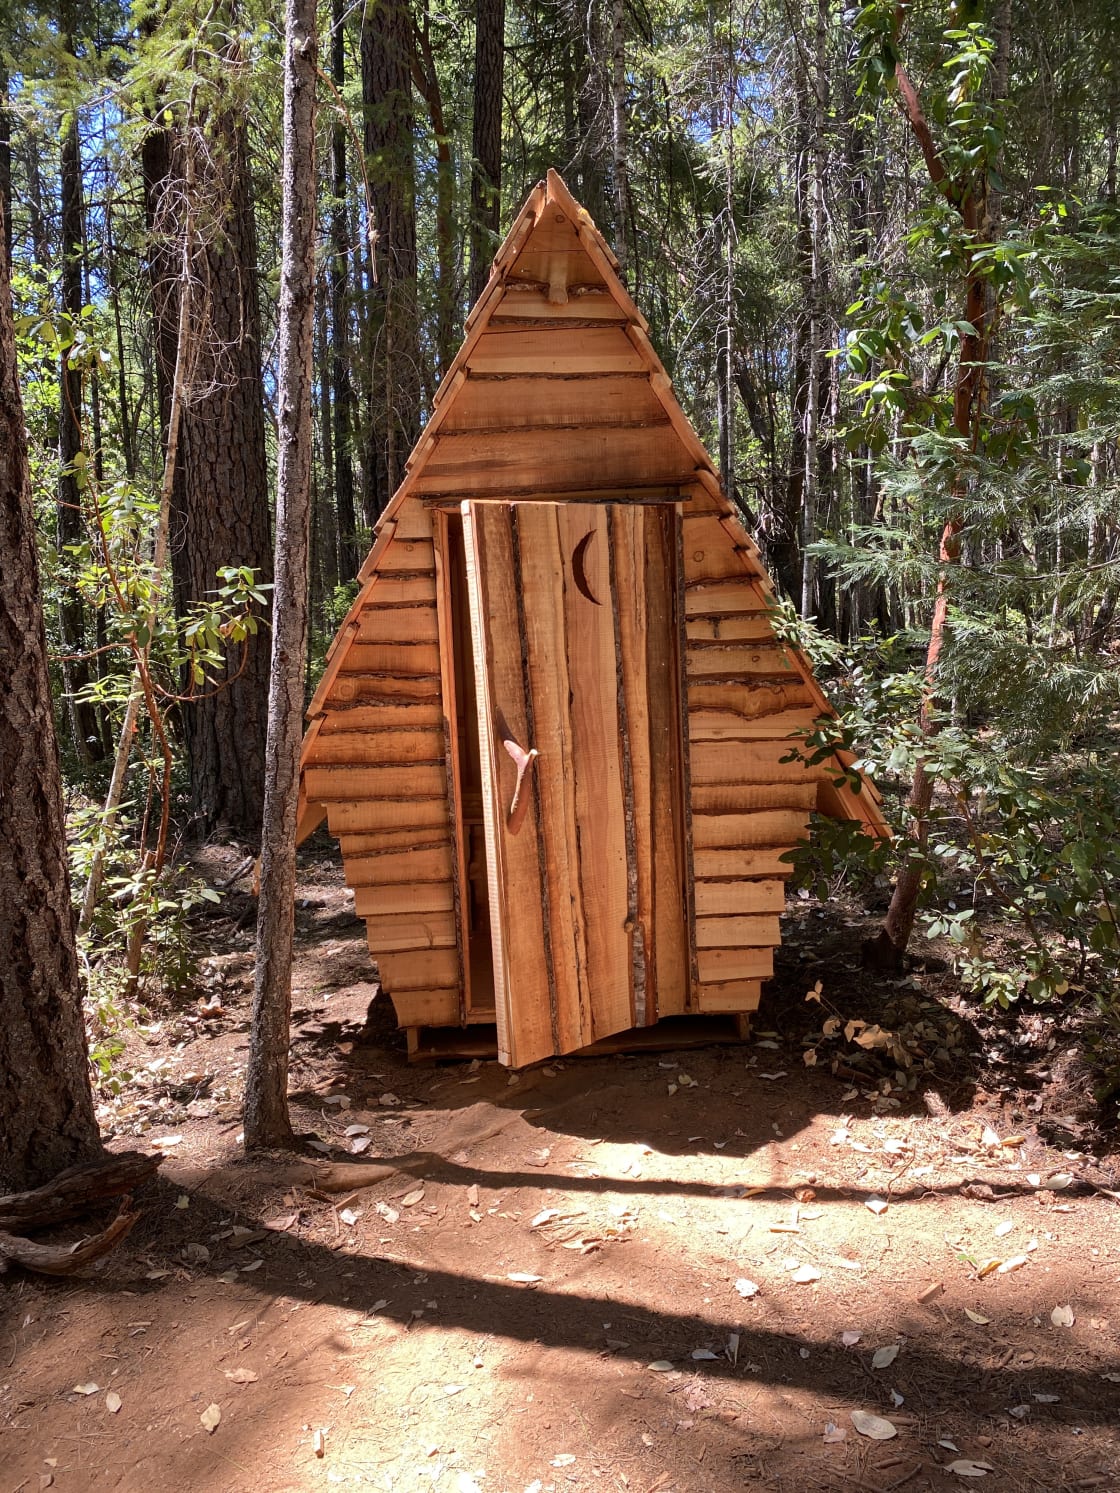 We have 2 brand new outhouses that we cut, milled and built right here on Laughing Mountain!